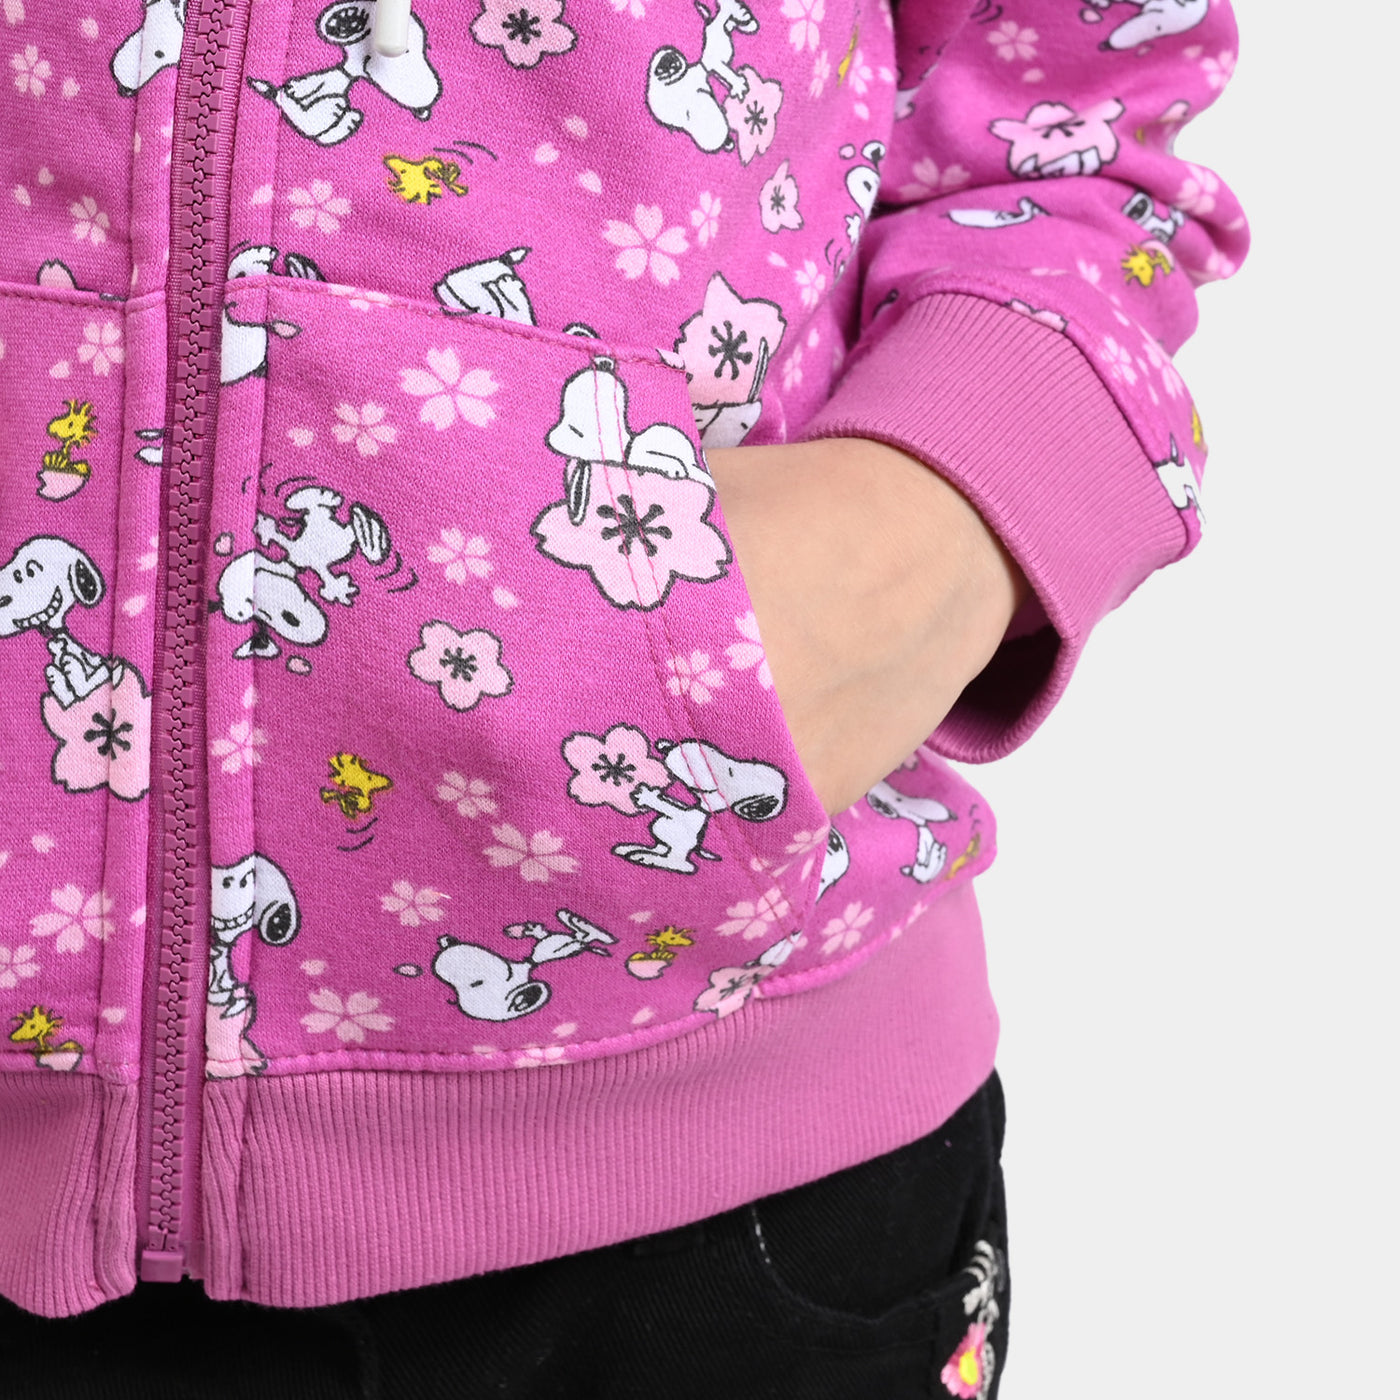 Girls Knitted Jacket Character All Over Printed - Violet